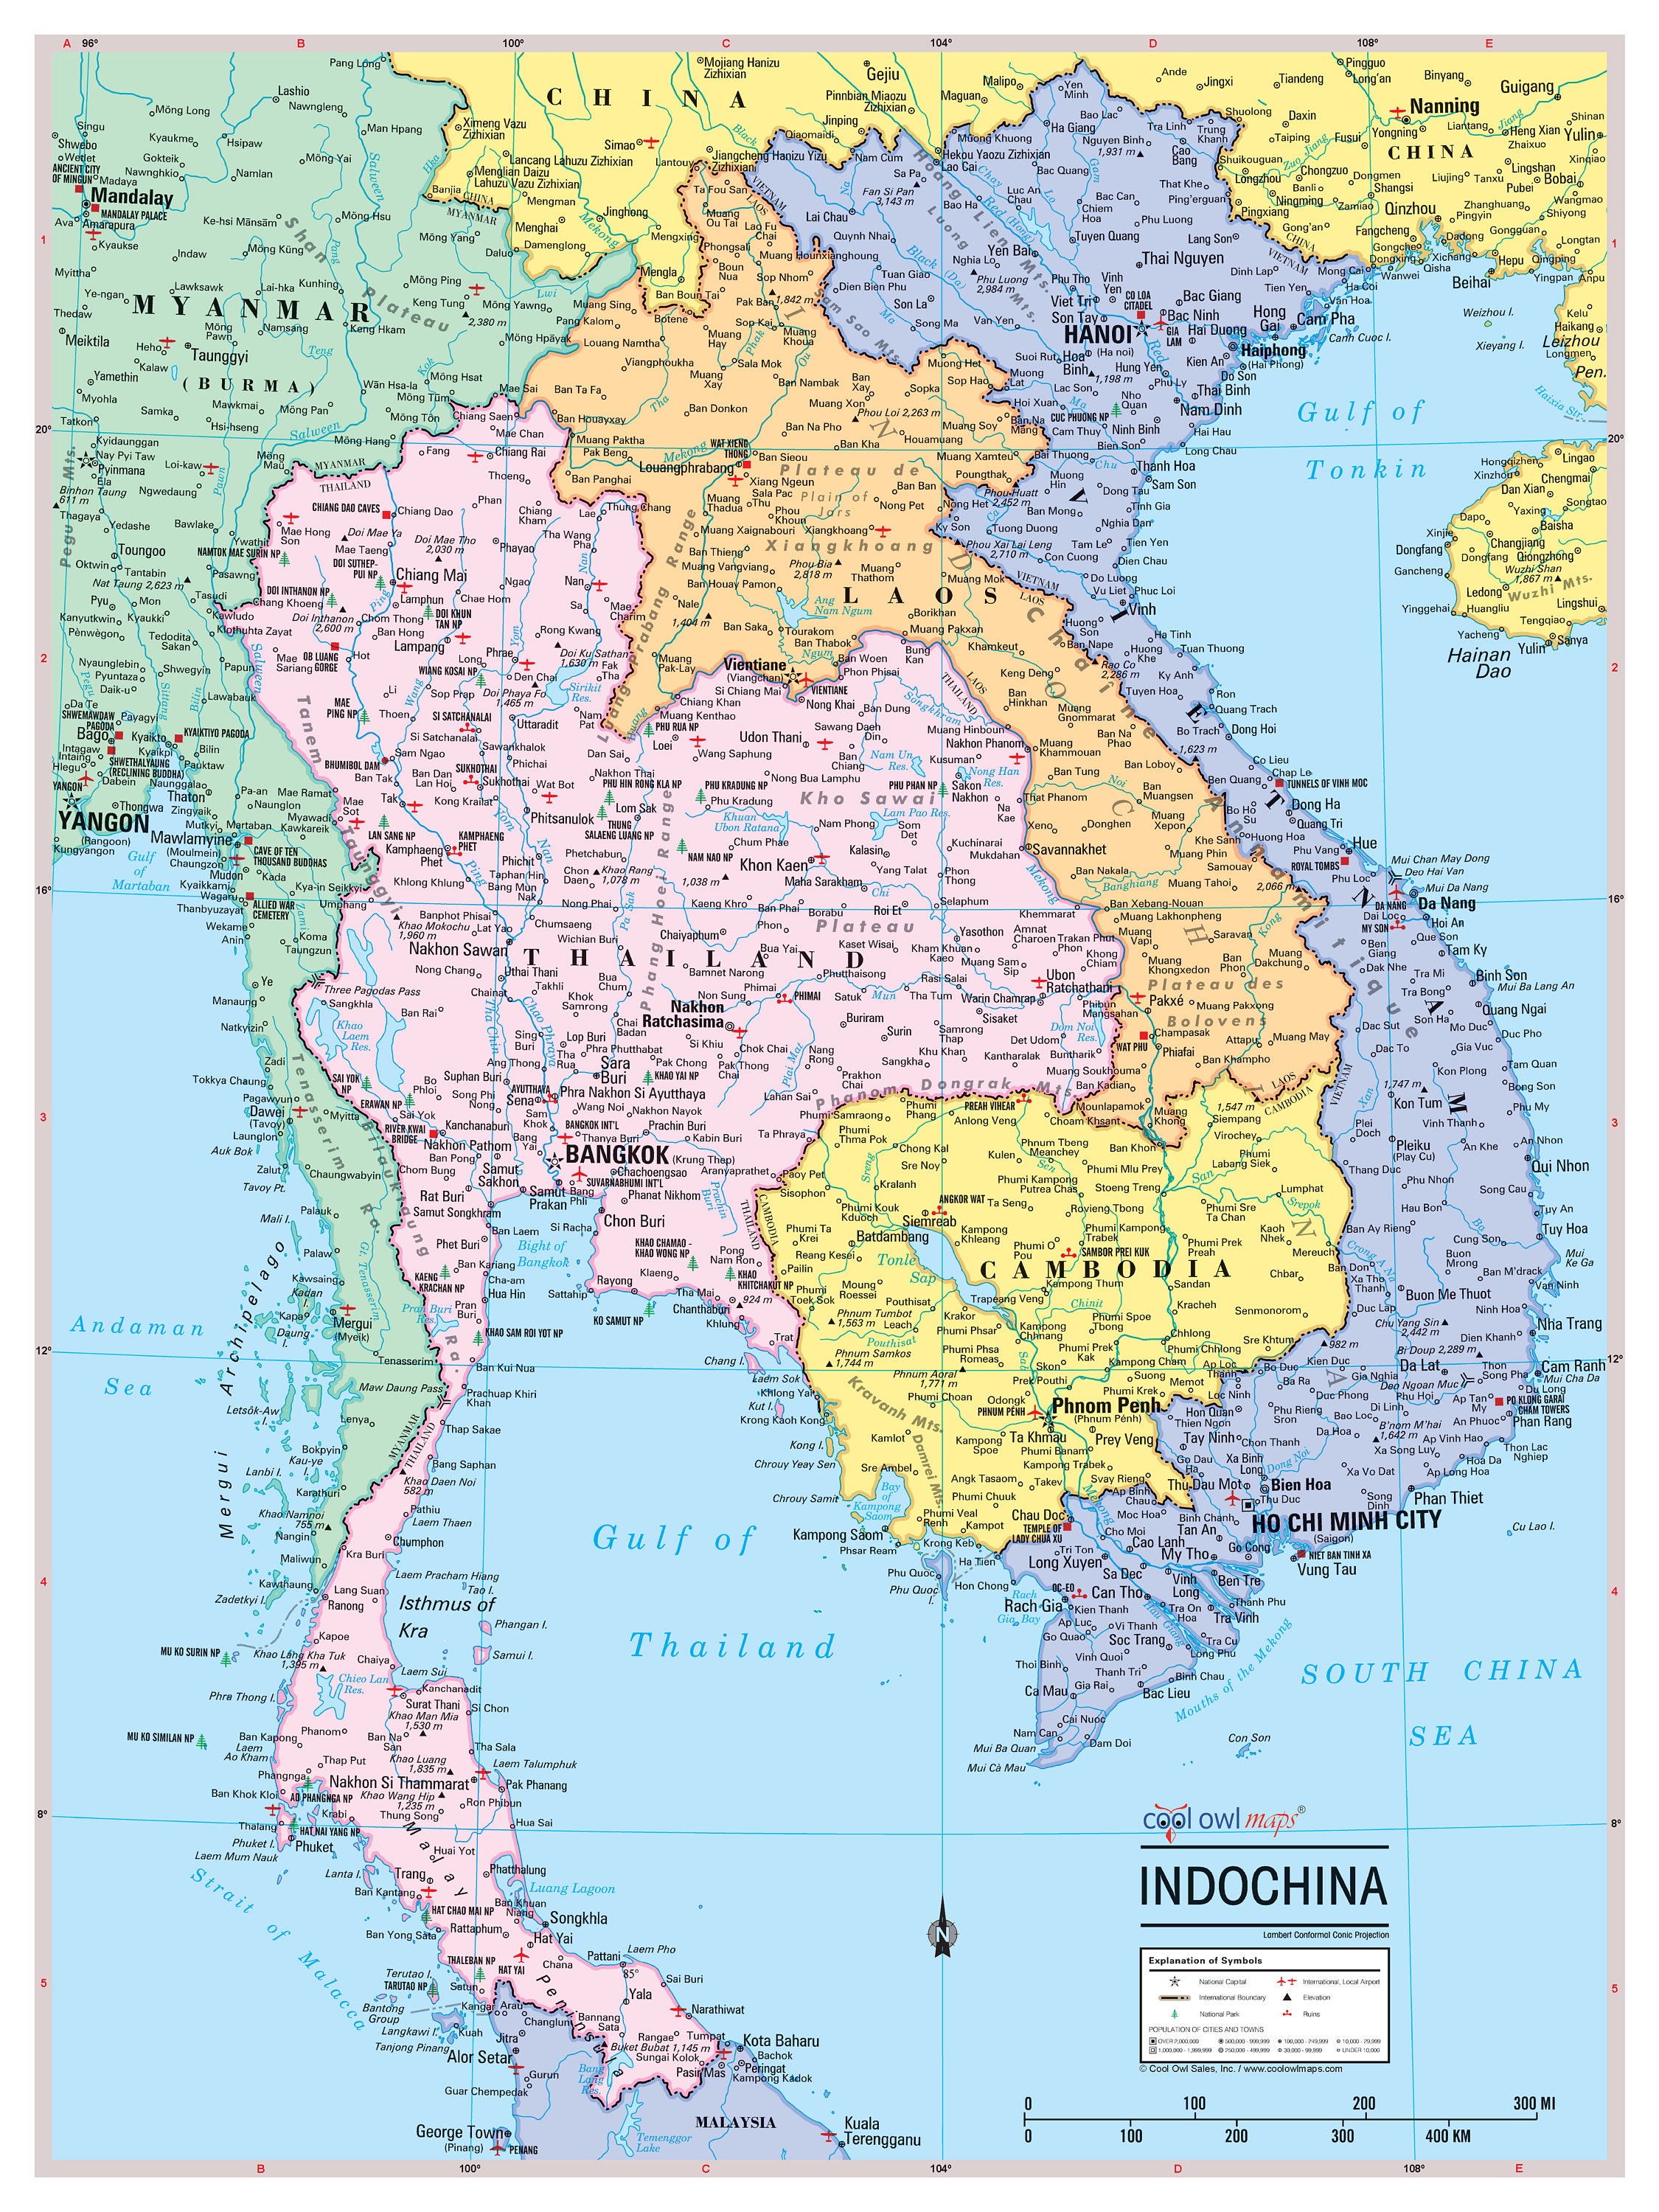 Indochina Region Wall Map Poster 24Wx32H | Etsy